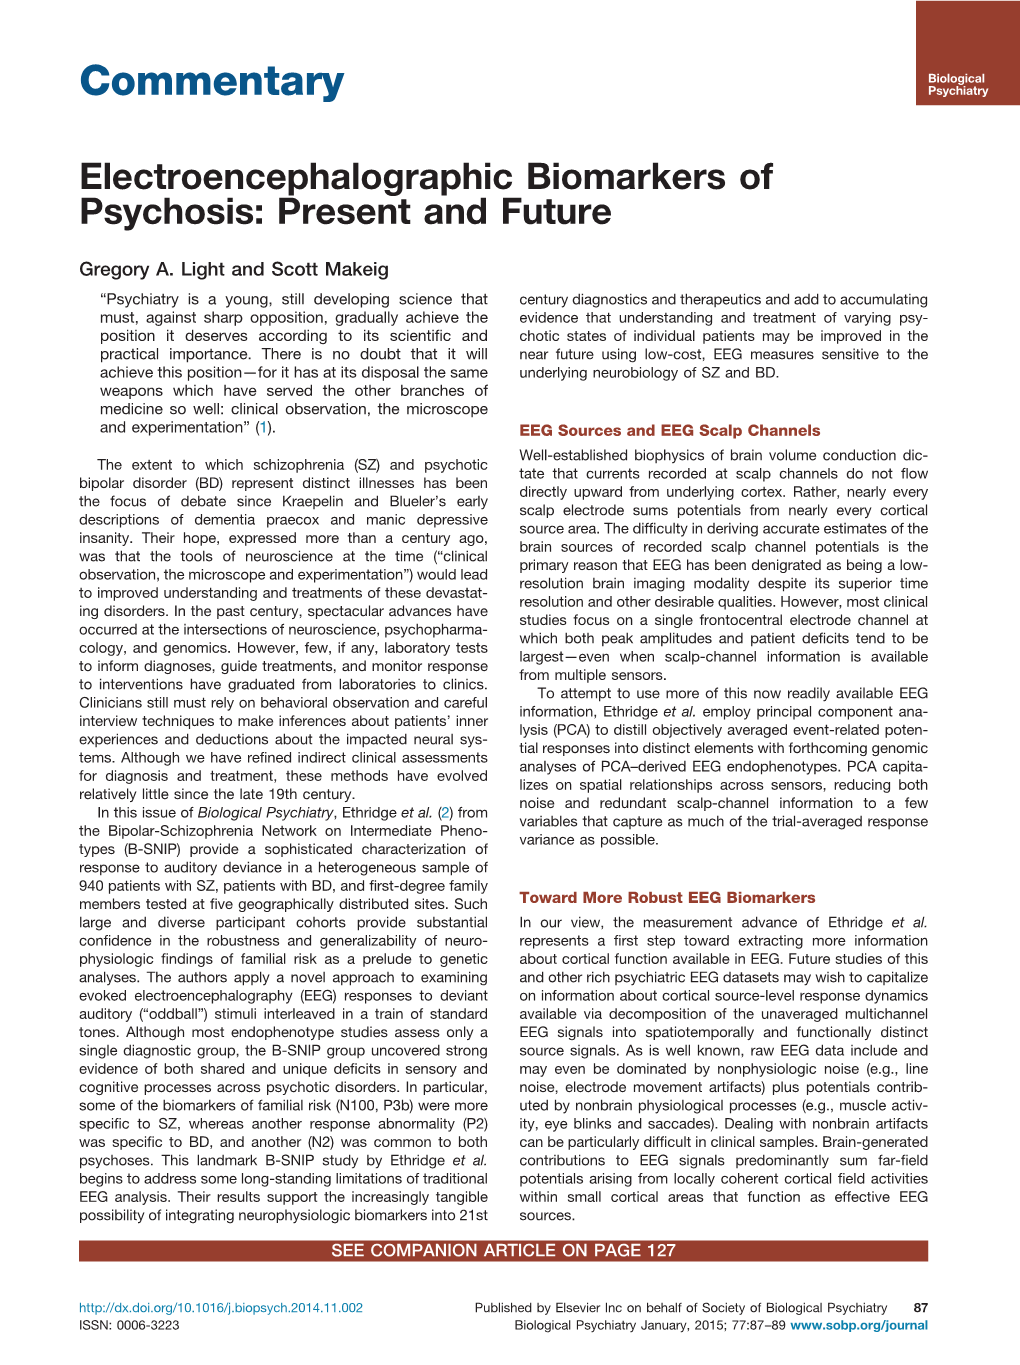 Electroencephalographic Biomarkers of Psychosis Present and Future